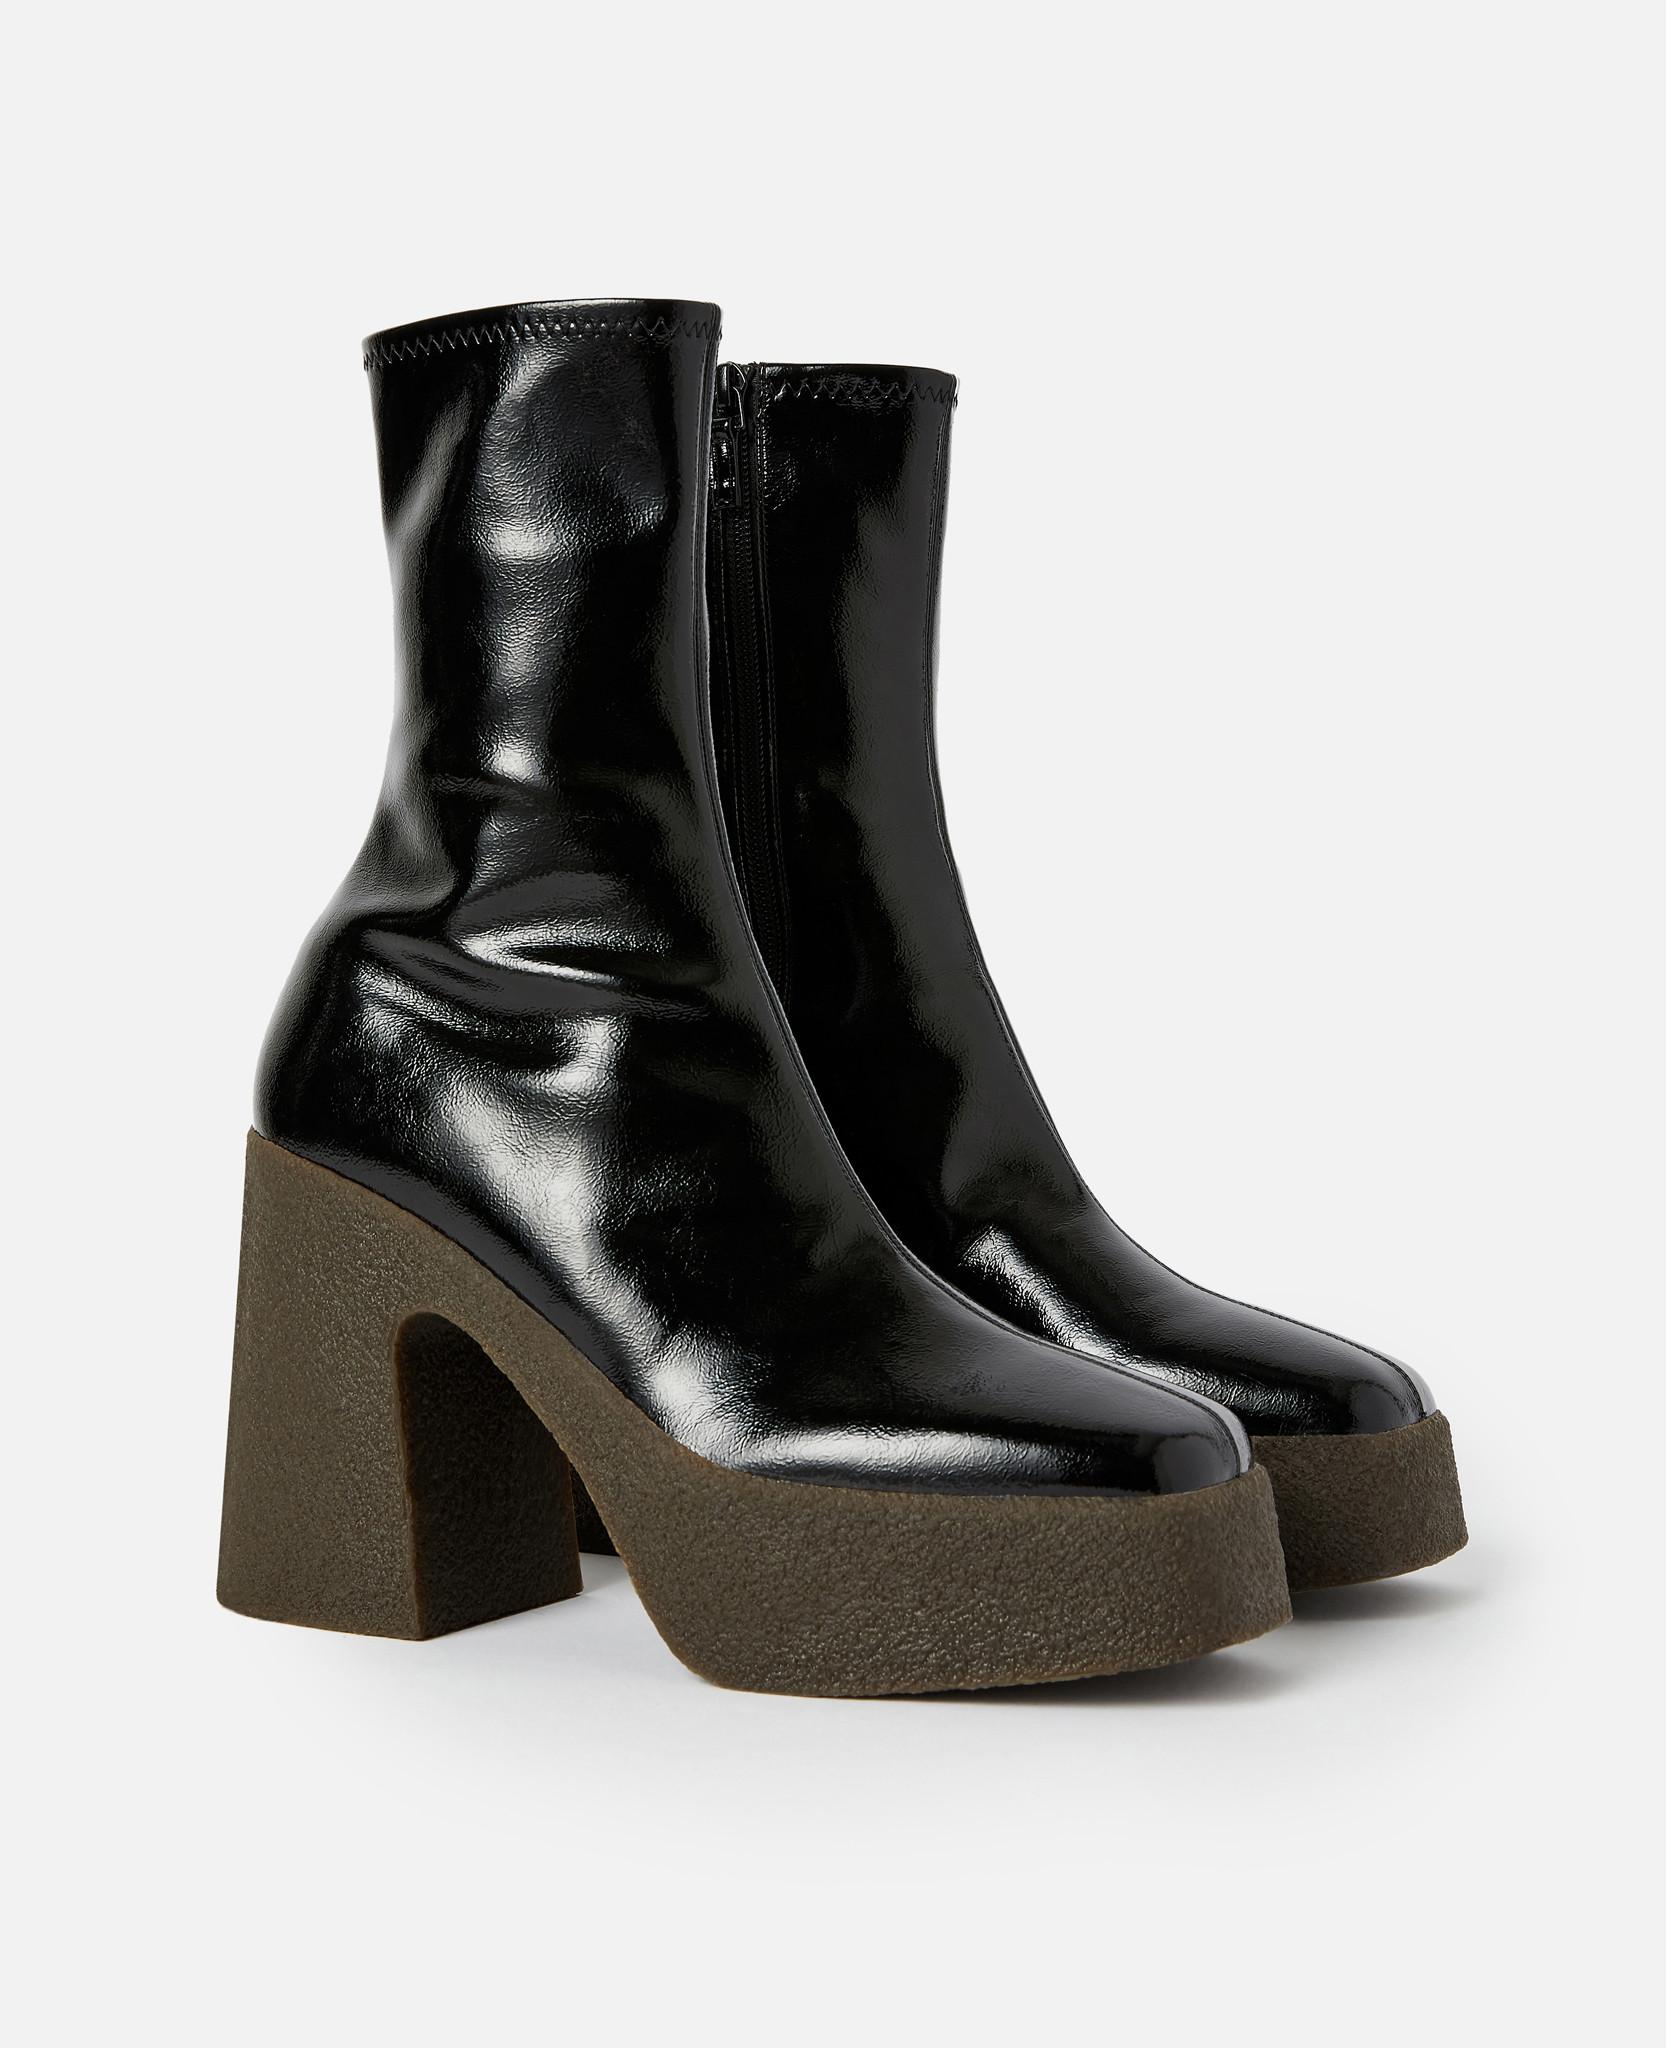 Stella McCartney Chunky Ankle Boots in Black - Lyst